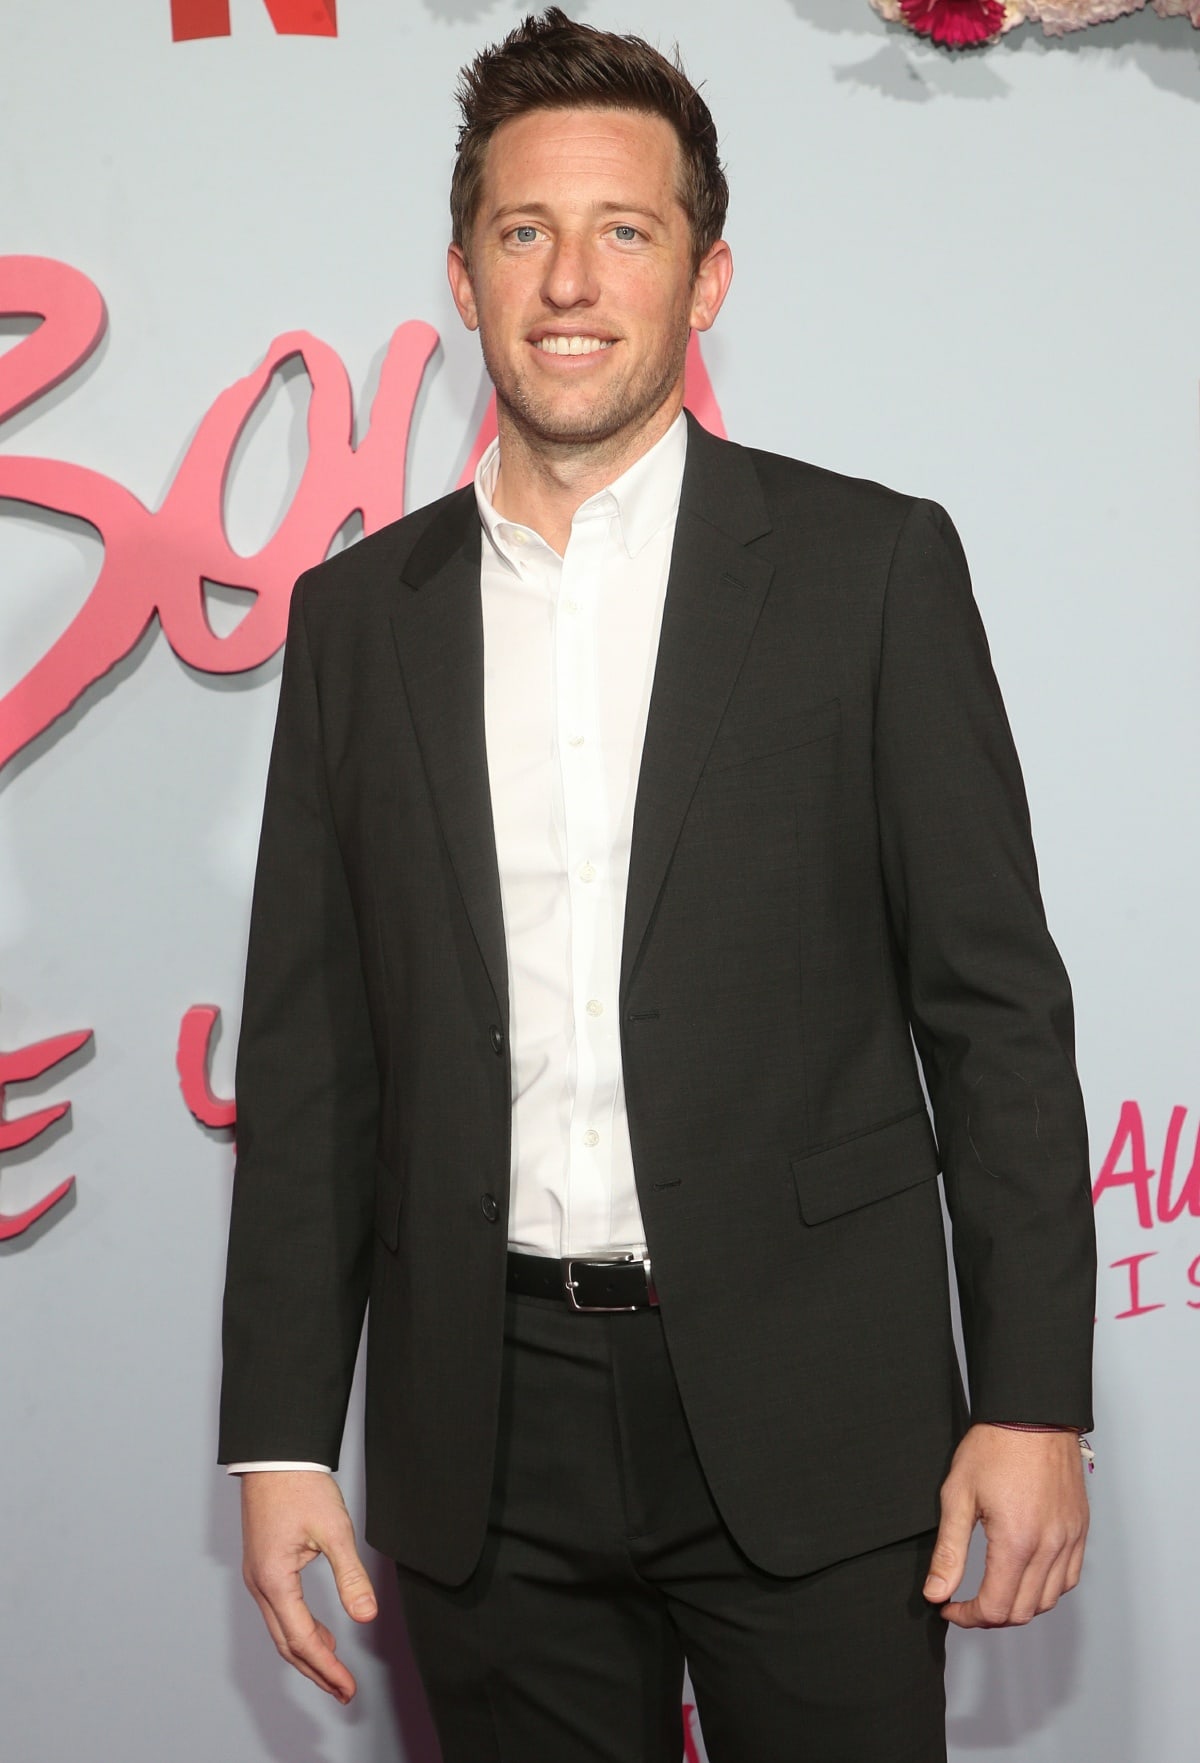 Matt Kaplan wearing a black suit with a white dress shirt at the premiere of To All the Boys: P.S. I Love You